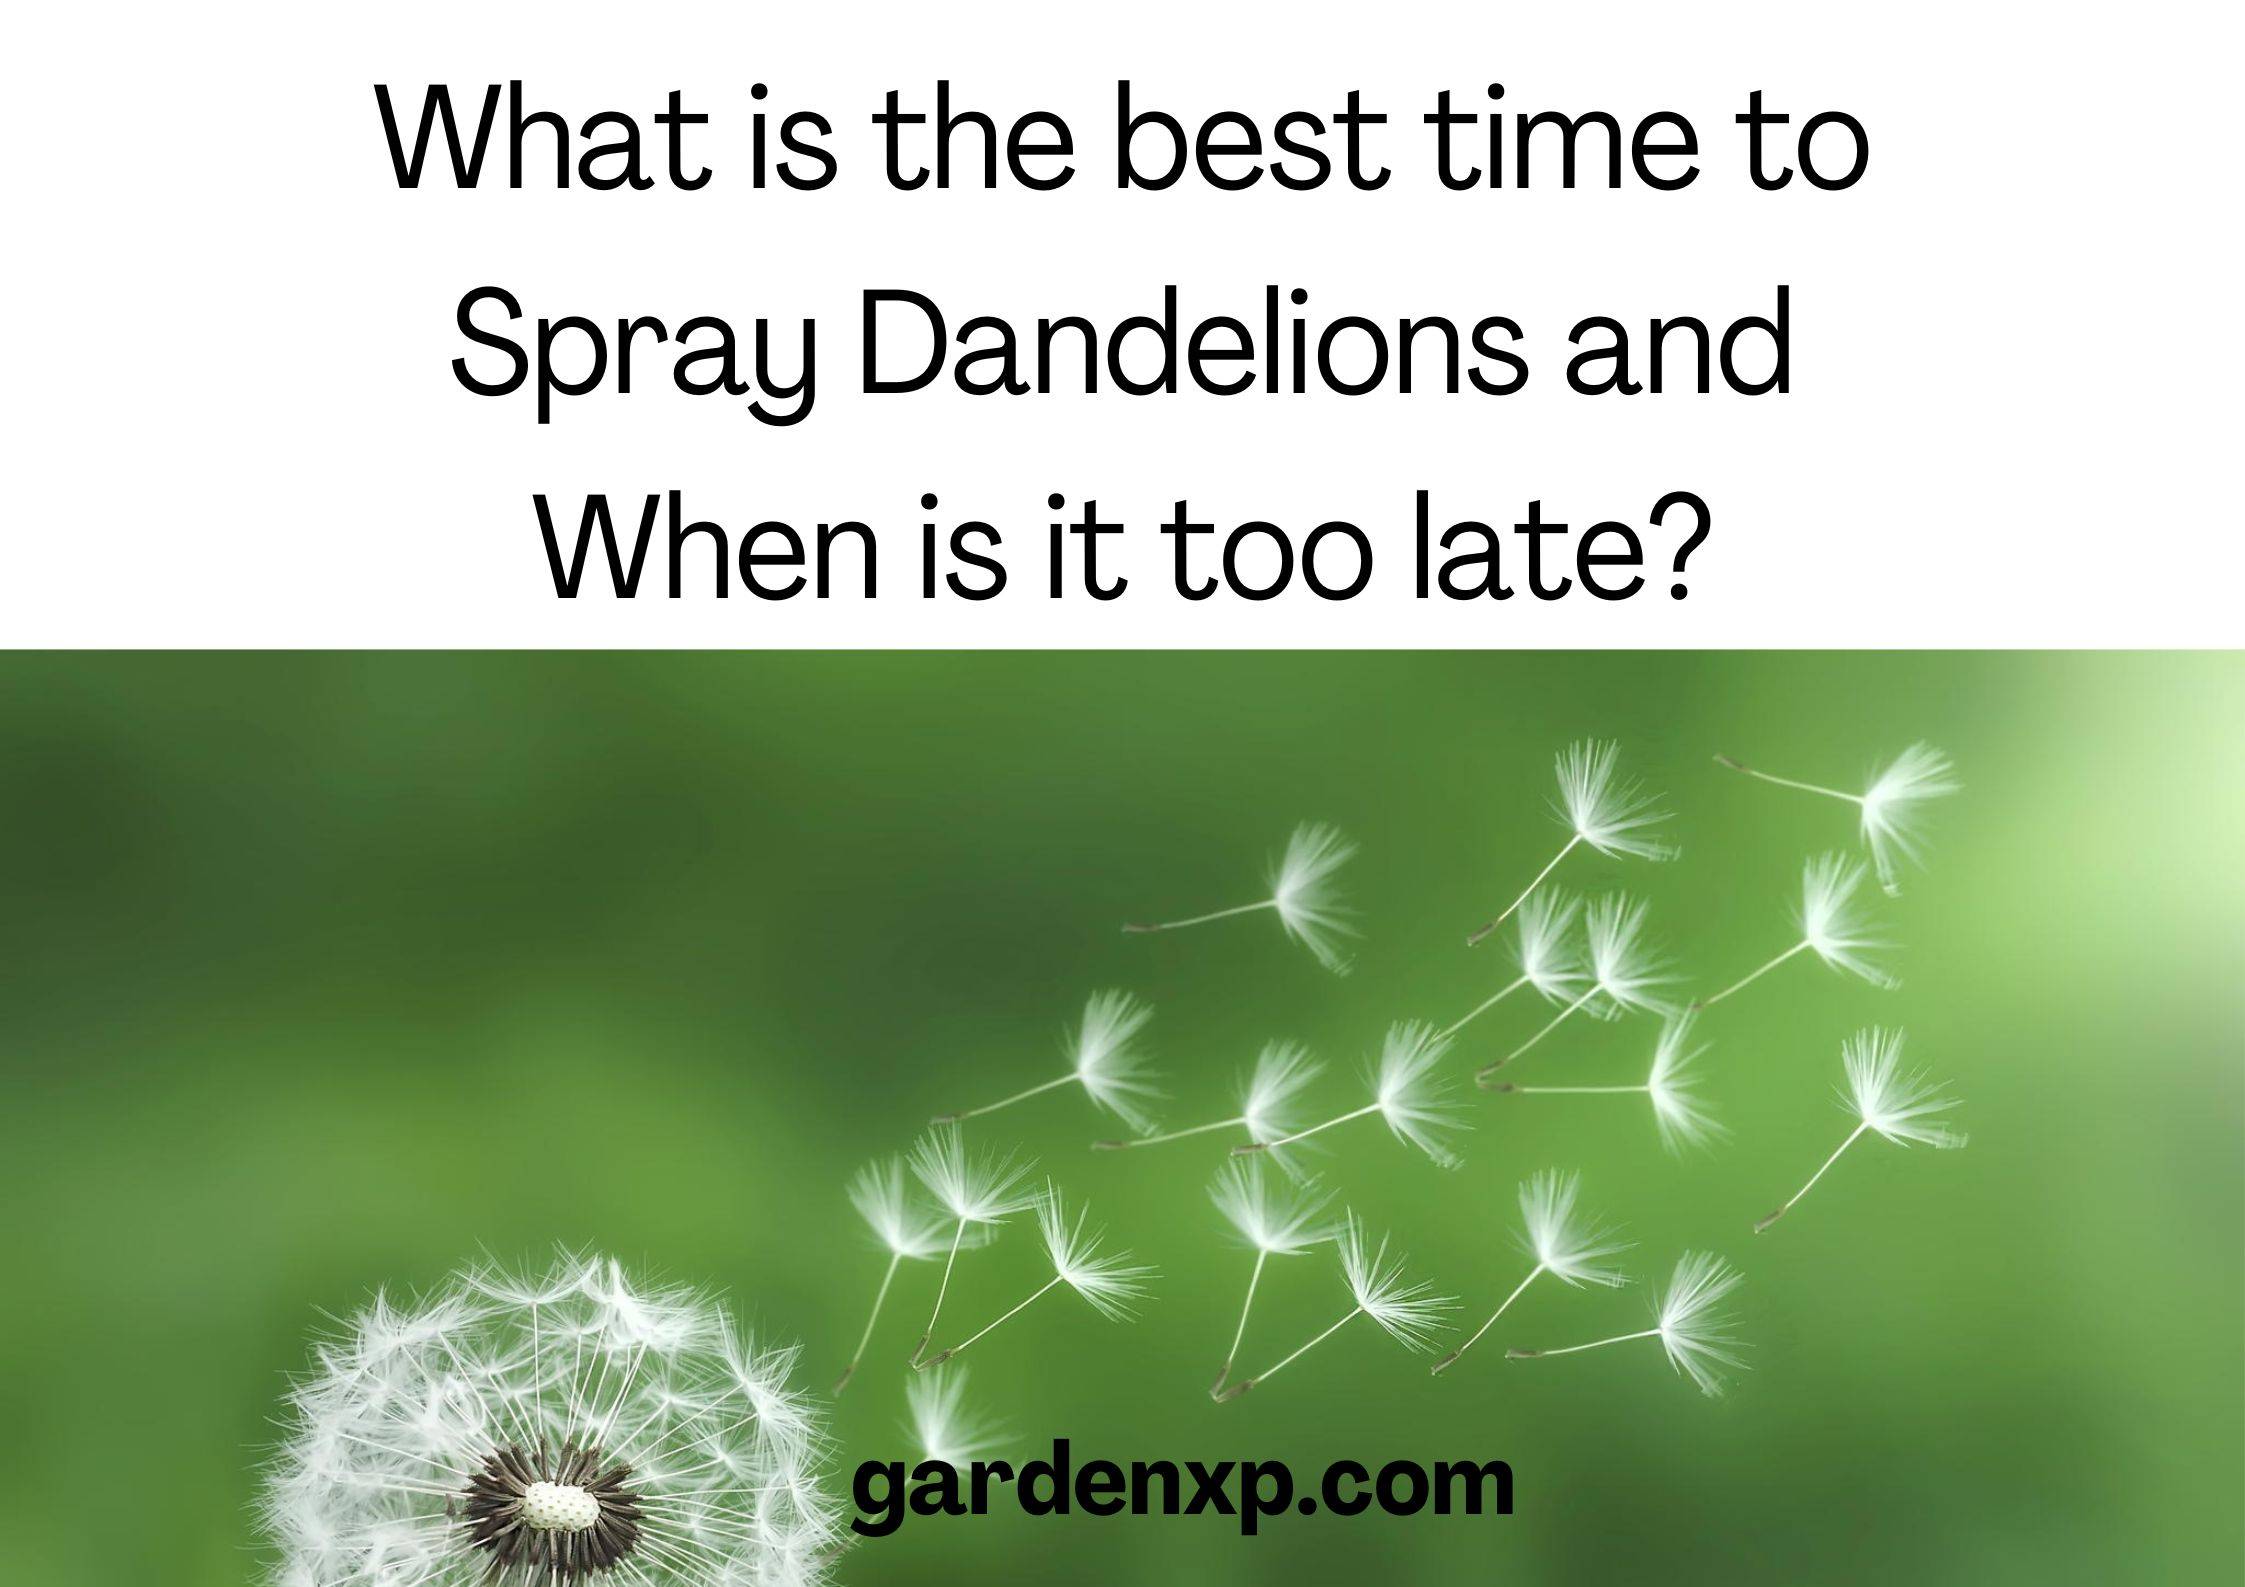 What is the best time to Spray Dandelions and When is it too late?